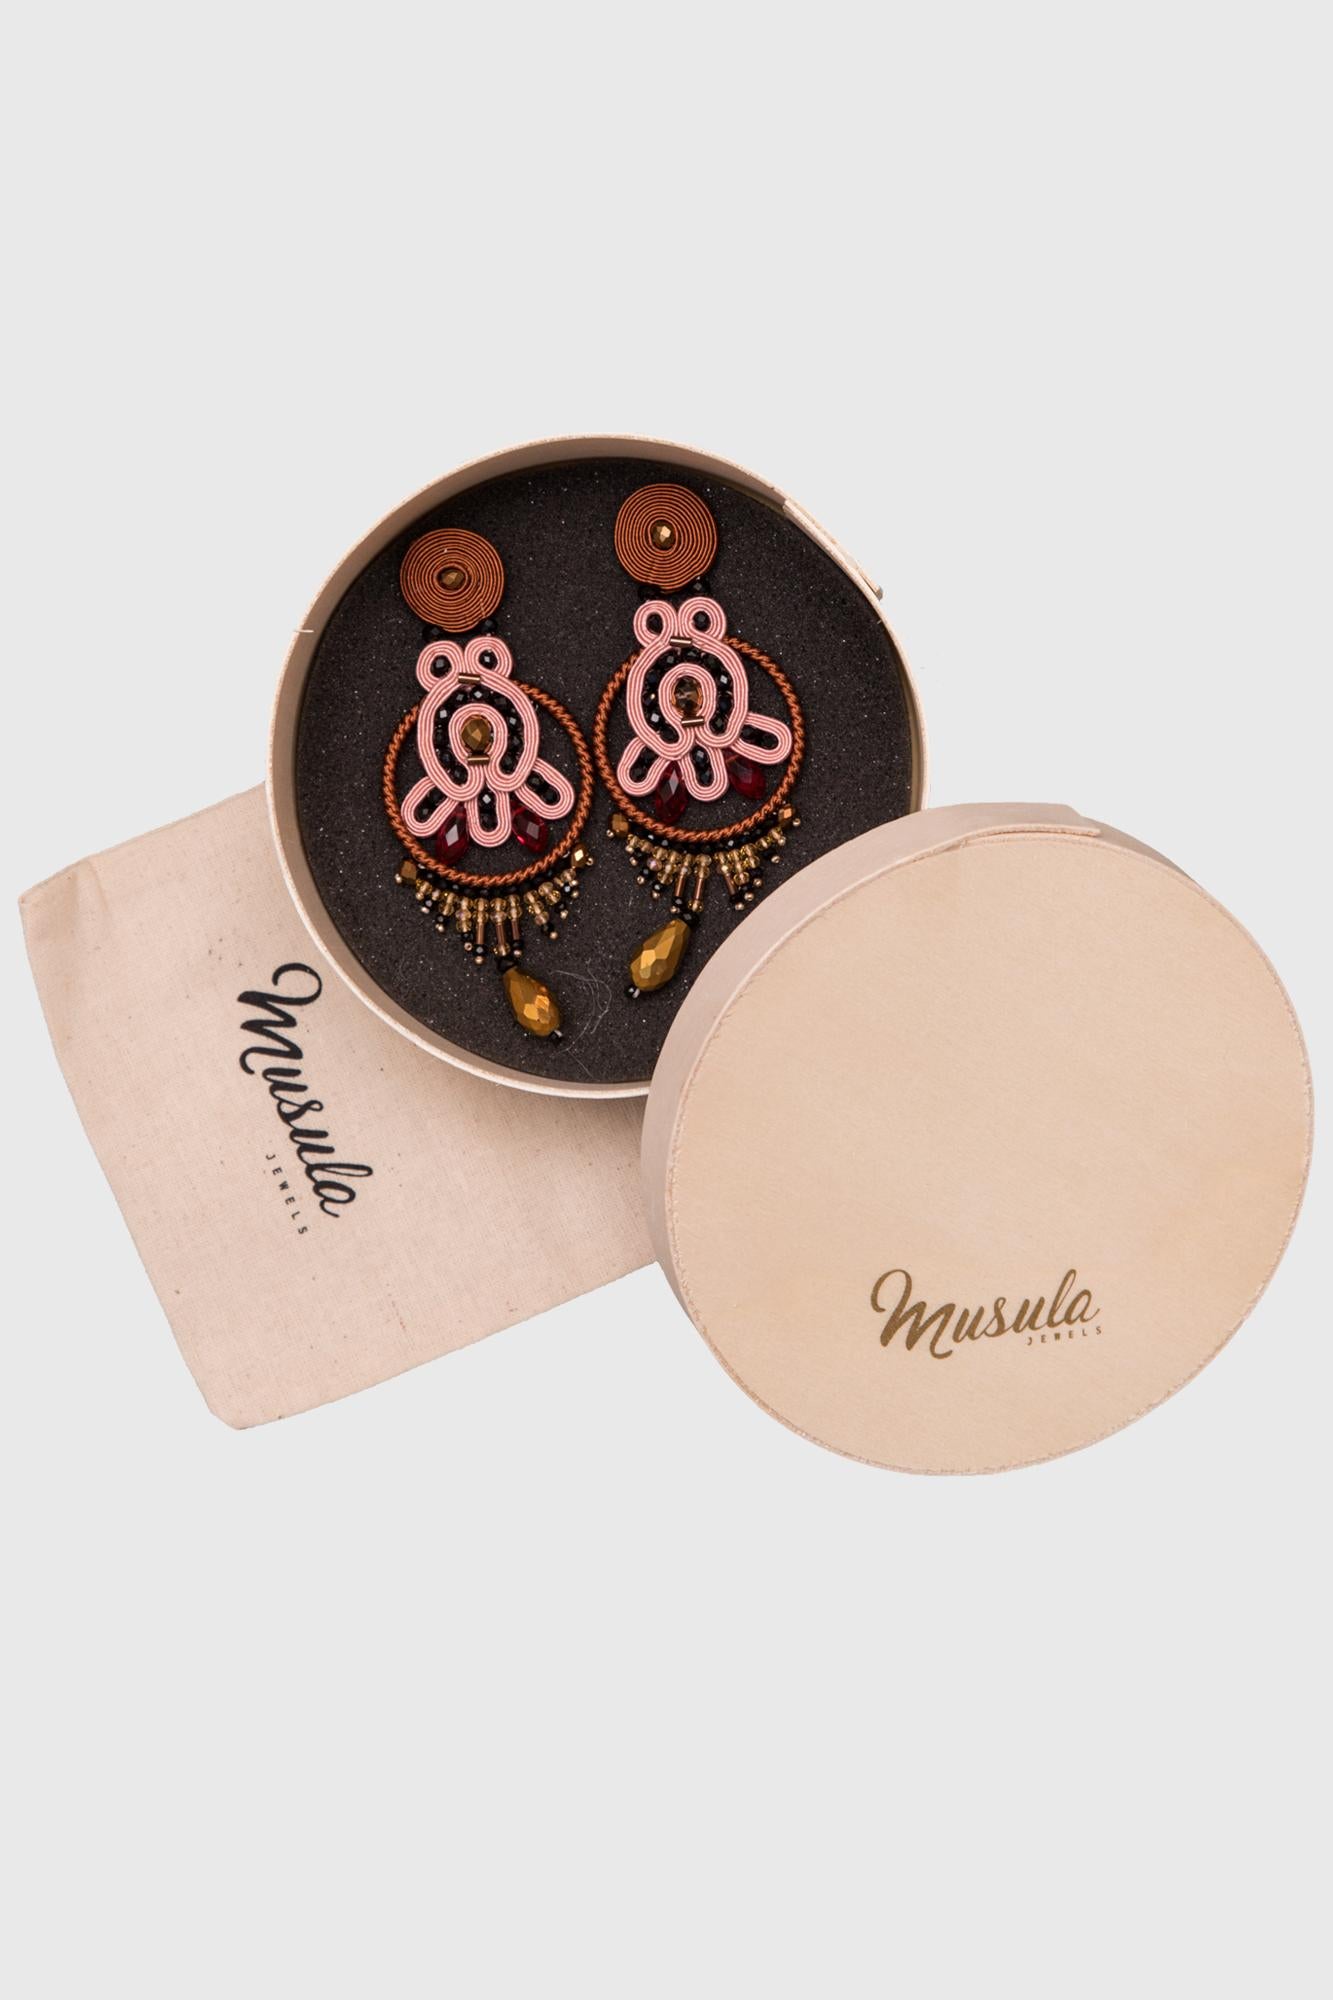 Musula La Patisserie Saint-Honoré Fraise Earrings
La Patisserie Collection is a special homage to sweet lovers
Musula in the Fall collection 2021 wants  to pay tribute to the sweet and delicate Pastry world. Pastries have been always a must at our